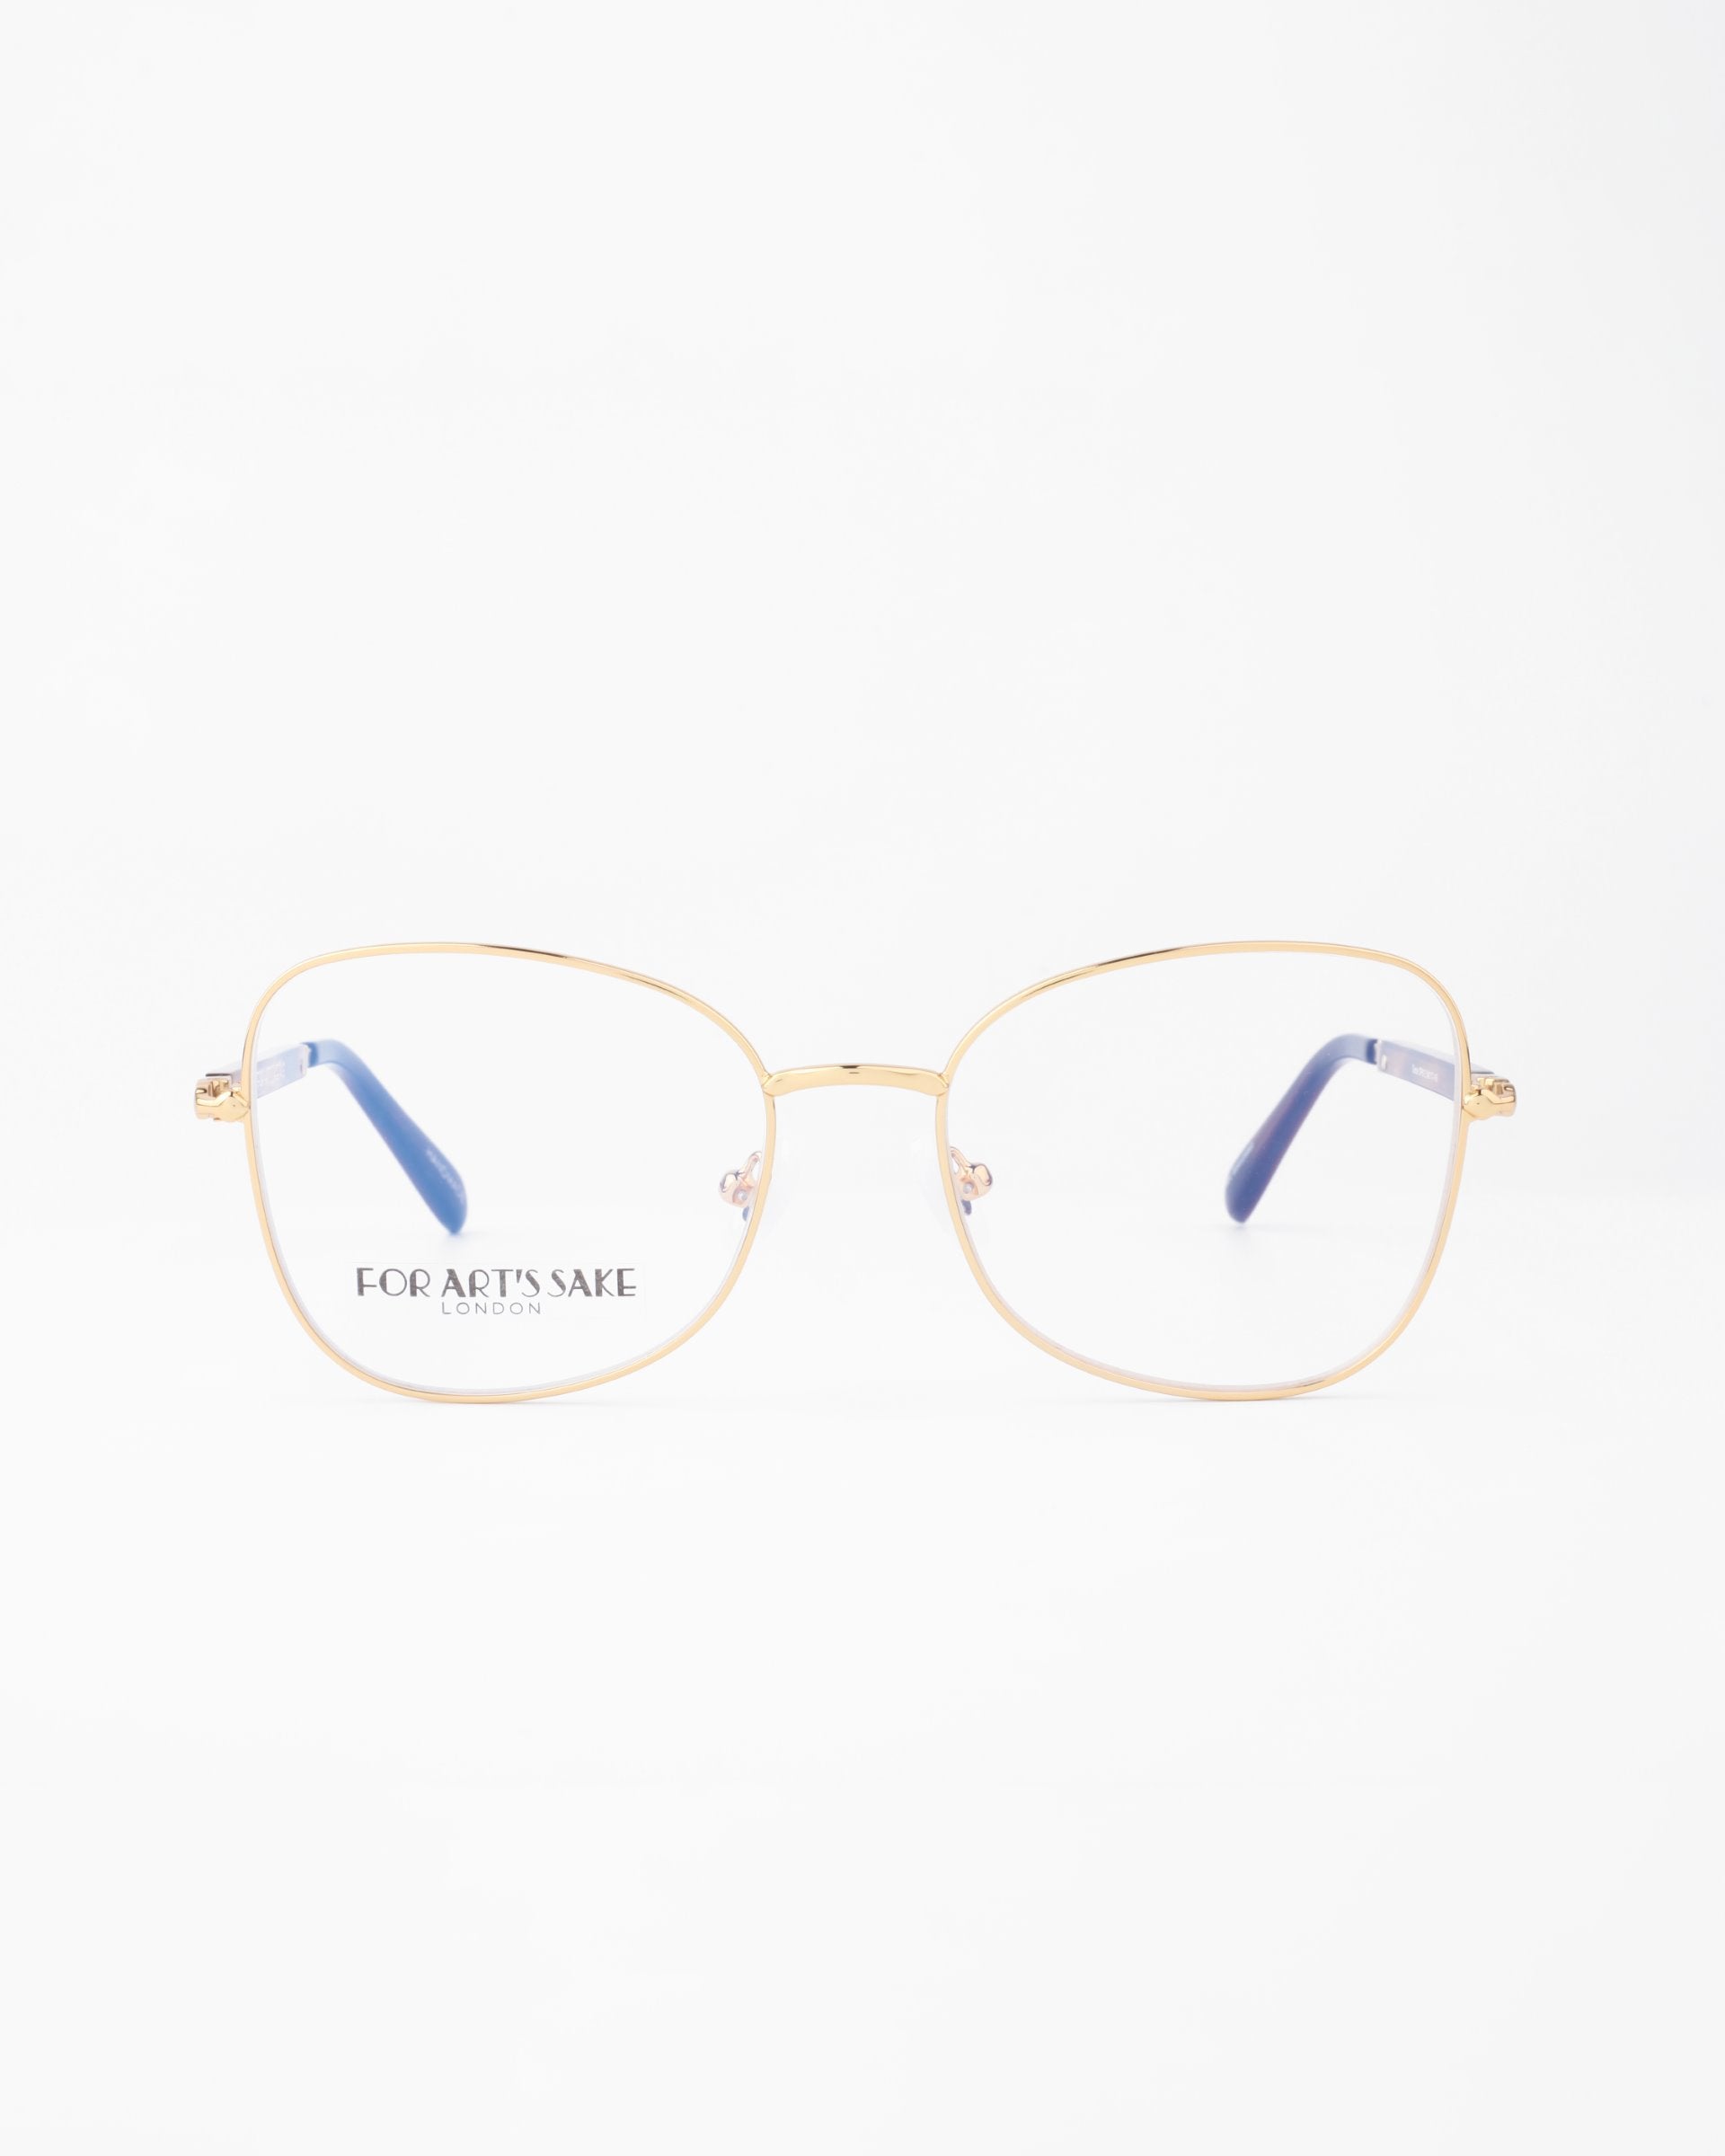 Front view of a pair of gold-framed eyeglasses with square lenses and blue temple tips, set against a plain white background. The 18-karat gold-plated Grace glasses have the brand name &quot;For Art&#39;s Sake®&quot; displayed on the left lens.